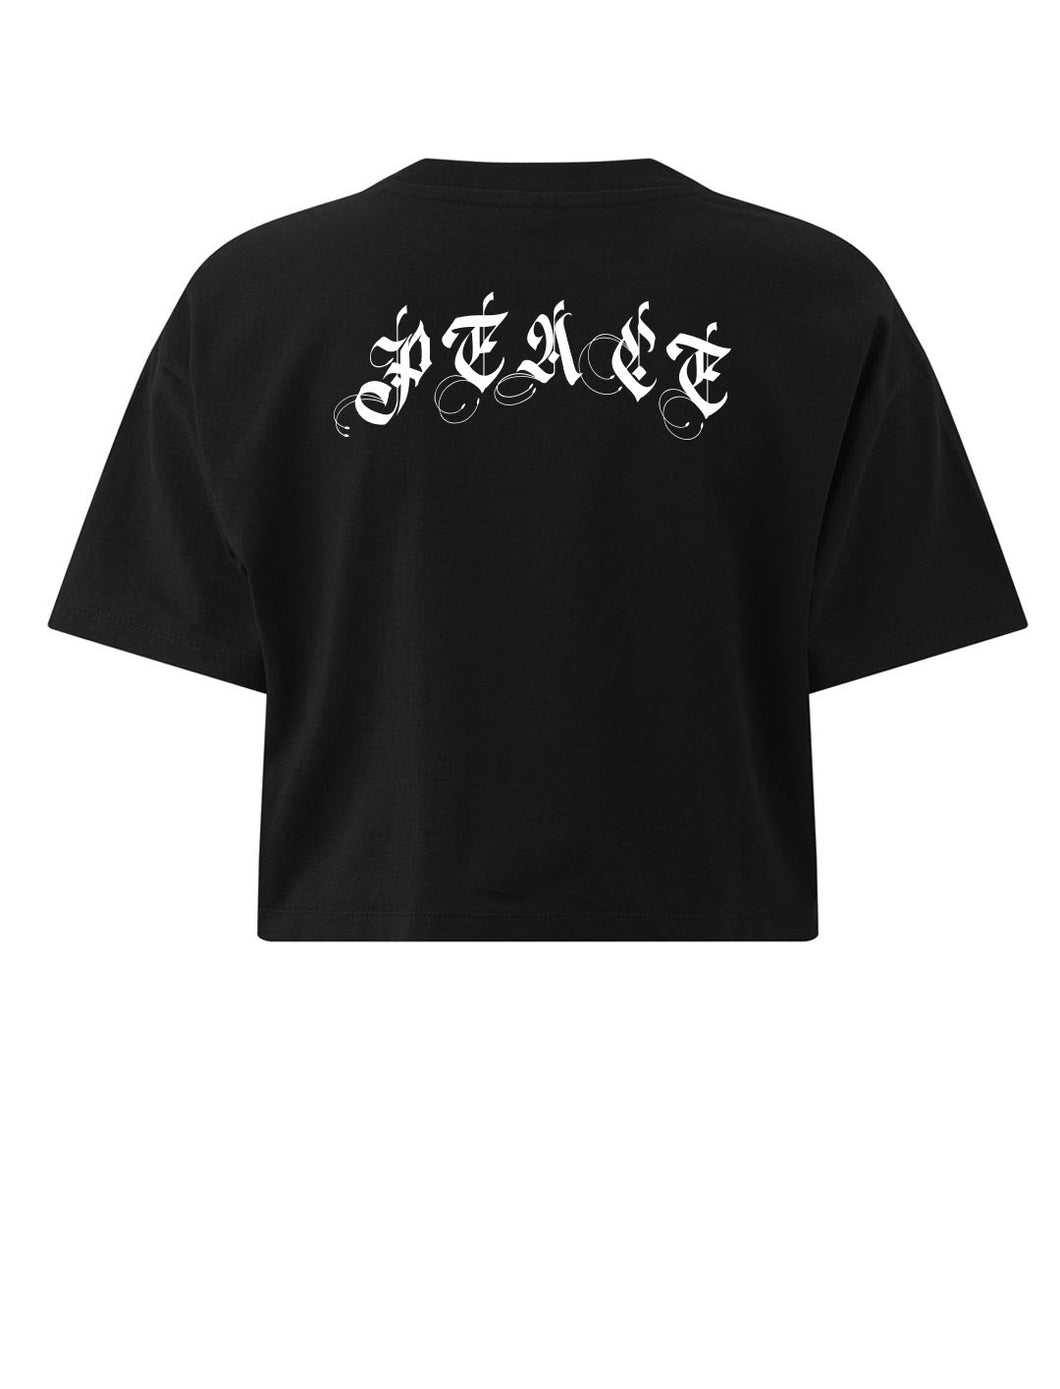 PEACE CROPPED T-SHIRT